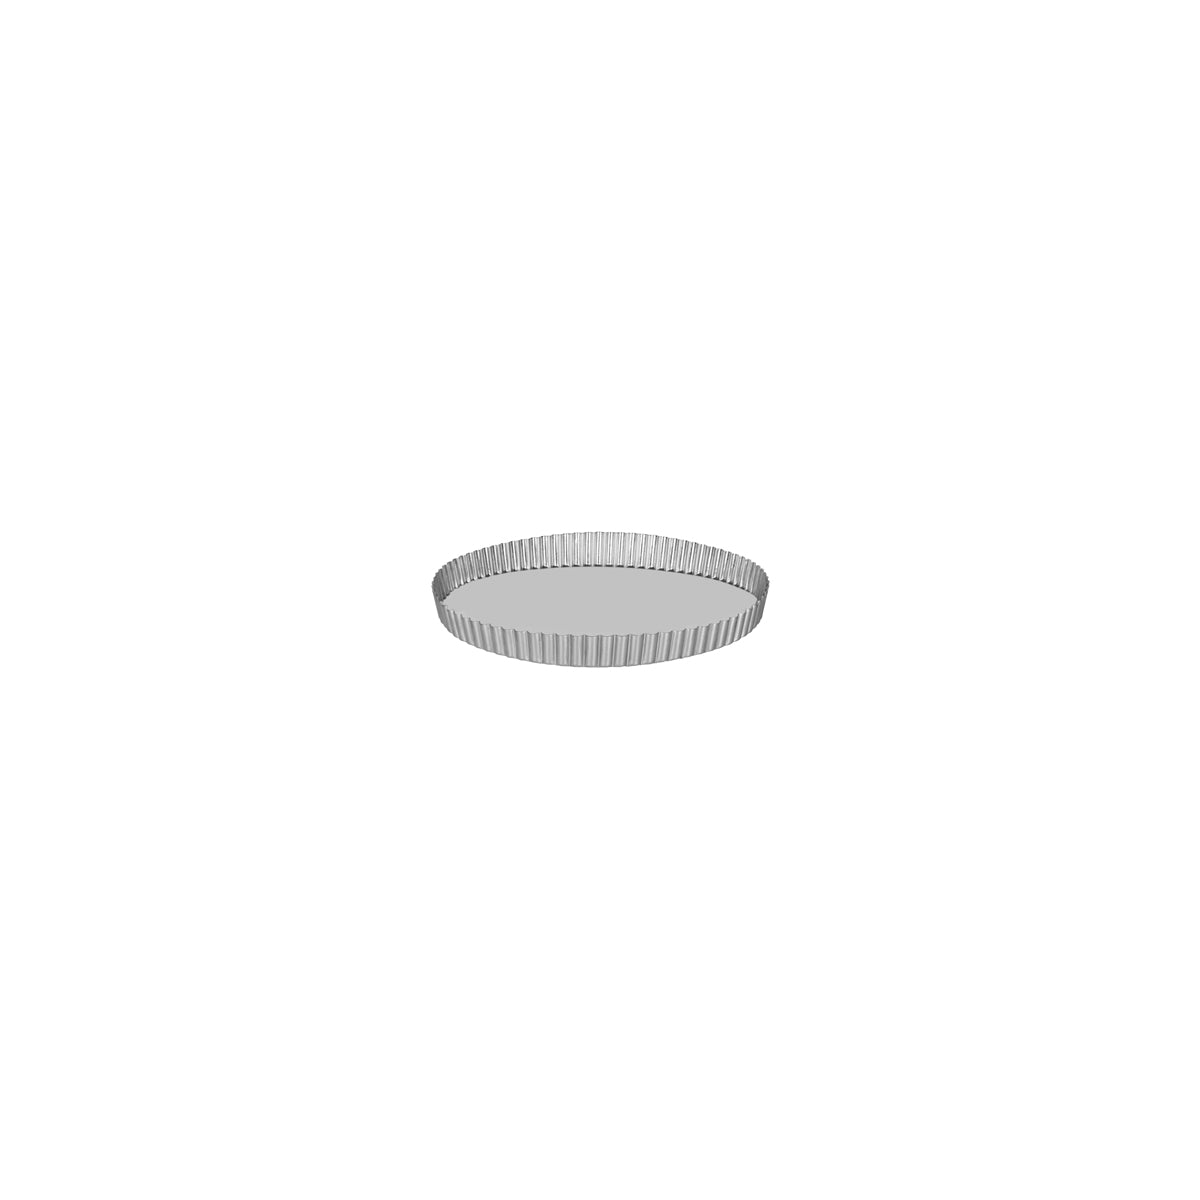 64120 Guery Quiche Pan Round Fluted Loose Base 200x25mm Tomkin Australia Hospitality Supplies